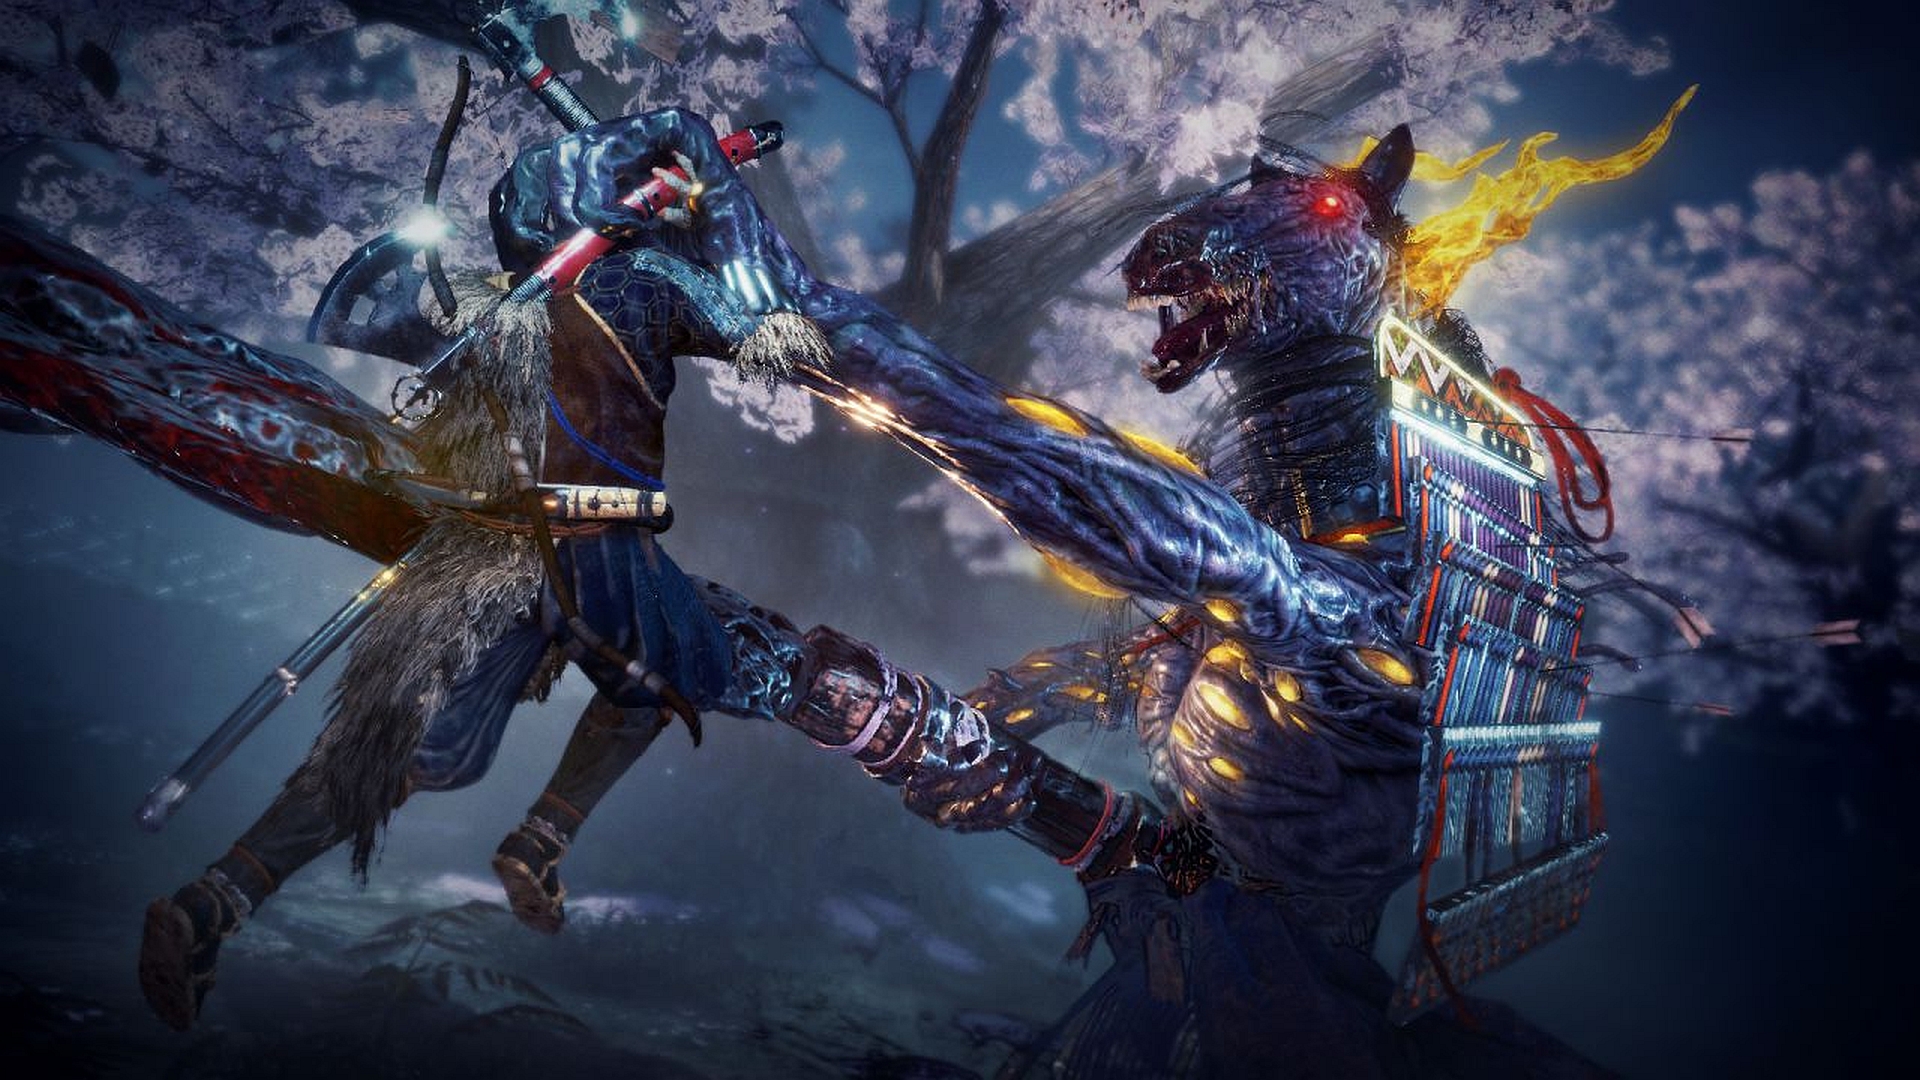 Nioh 2 4K Gameplay Footage Showcases TGS 2019 Demo and New